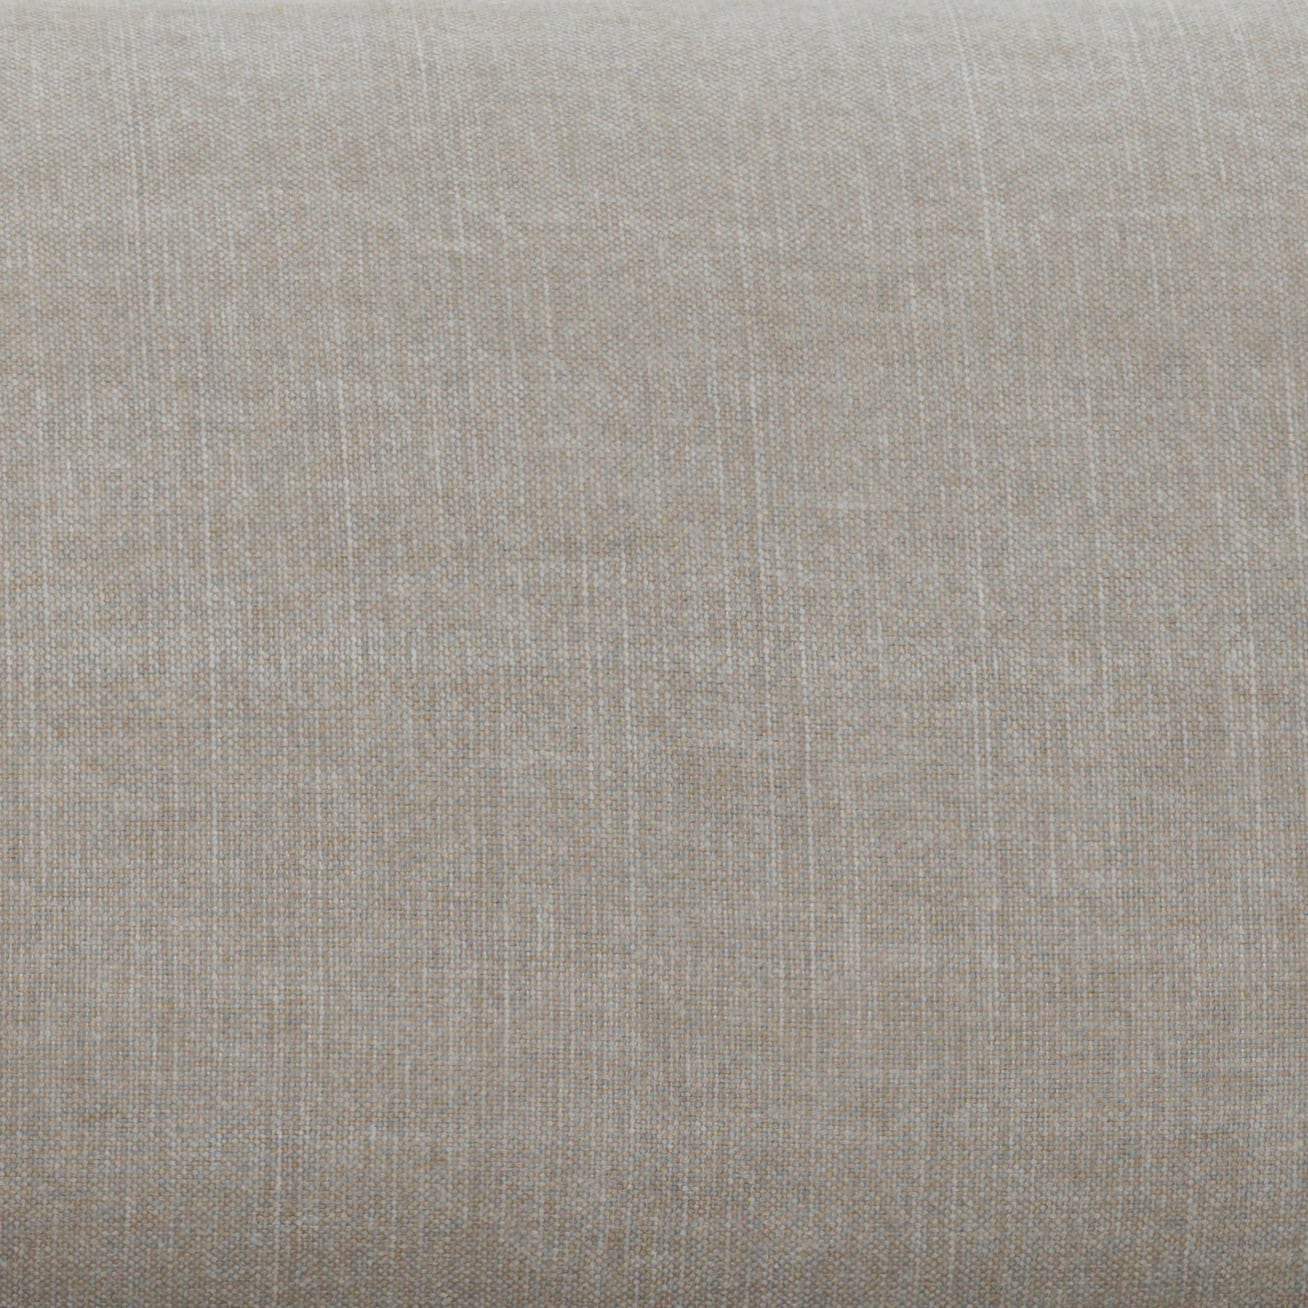 Cotton linen natural upholstery fabric made to order for Ferm Living Turn sofas & daybed. Order free fabric swatches at someday designs.